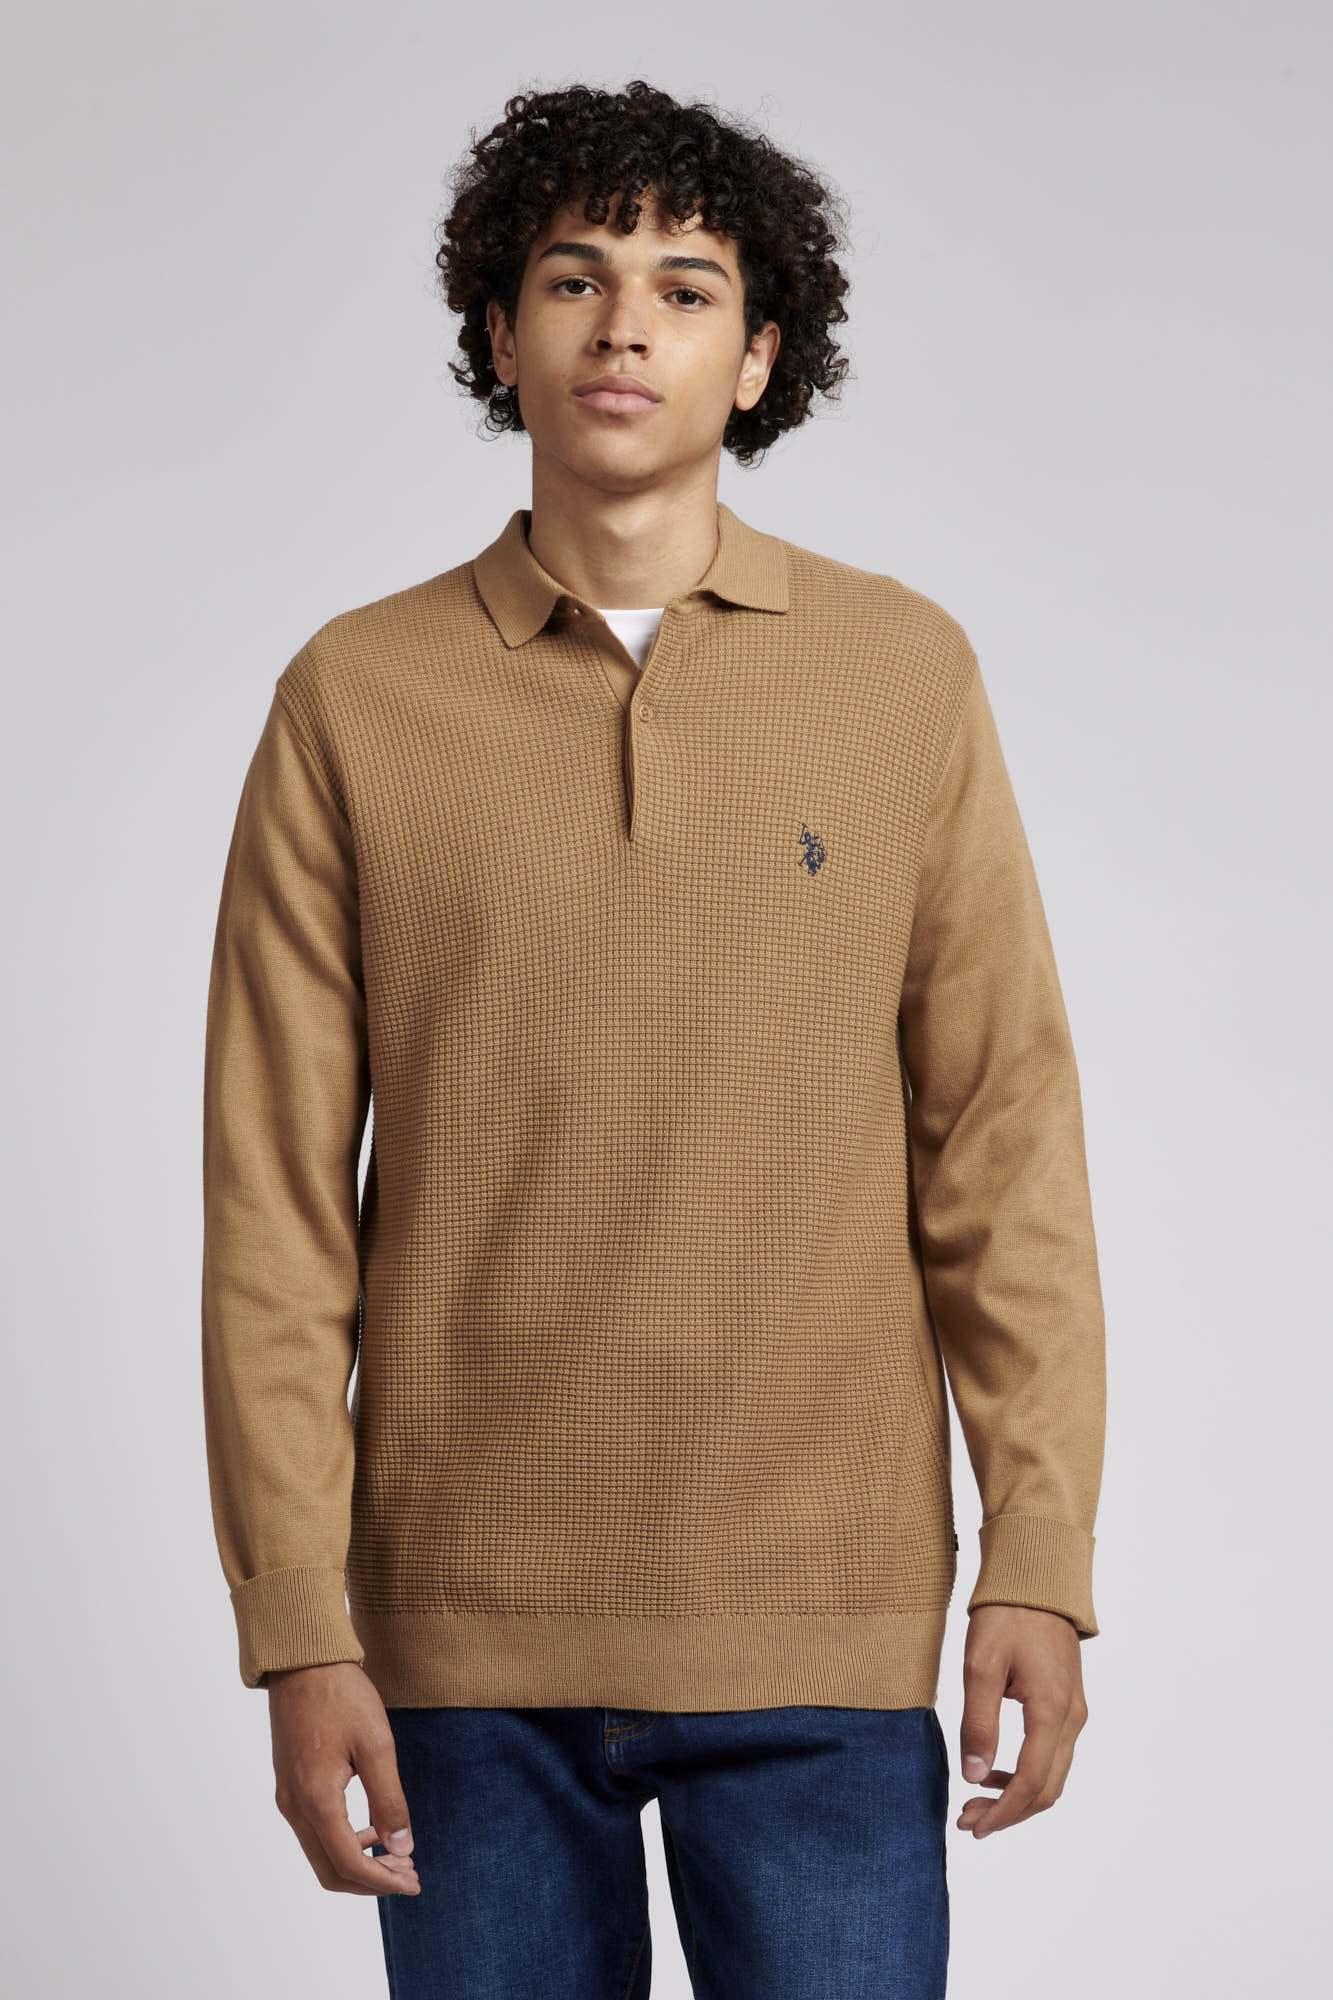 Mens Textured Knitted Polo Shirt in Tigers Eye